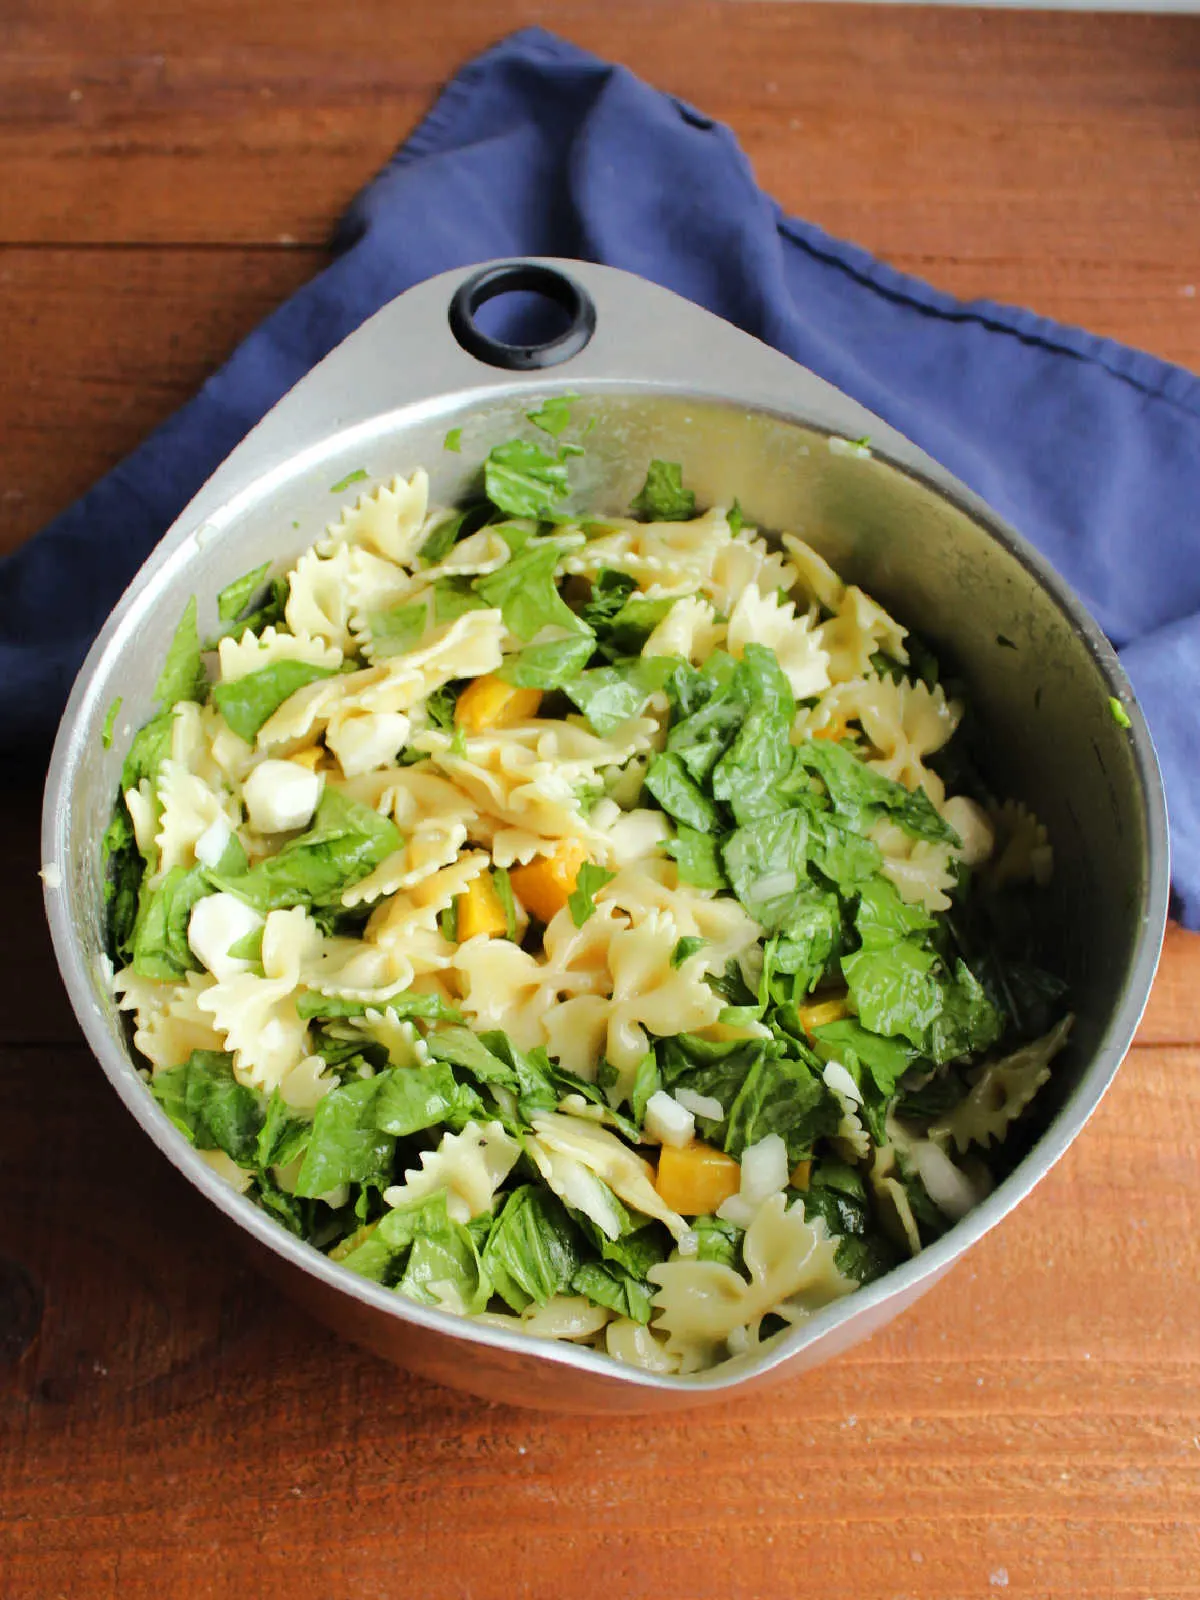 Large mixing bowl filled with peach pasta salad with spinach and cheese, ready to be served.